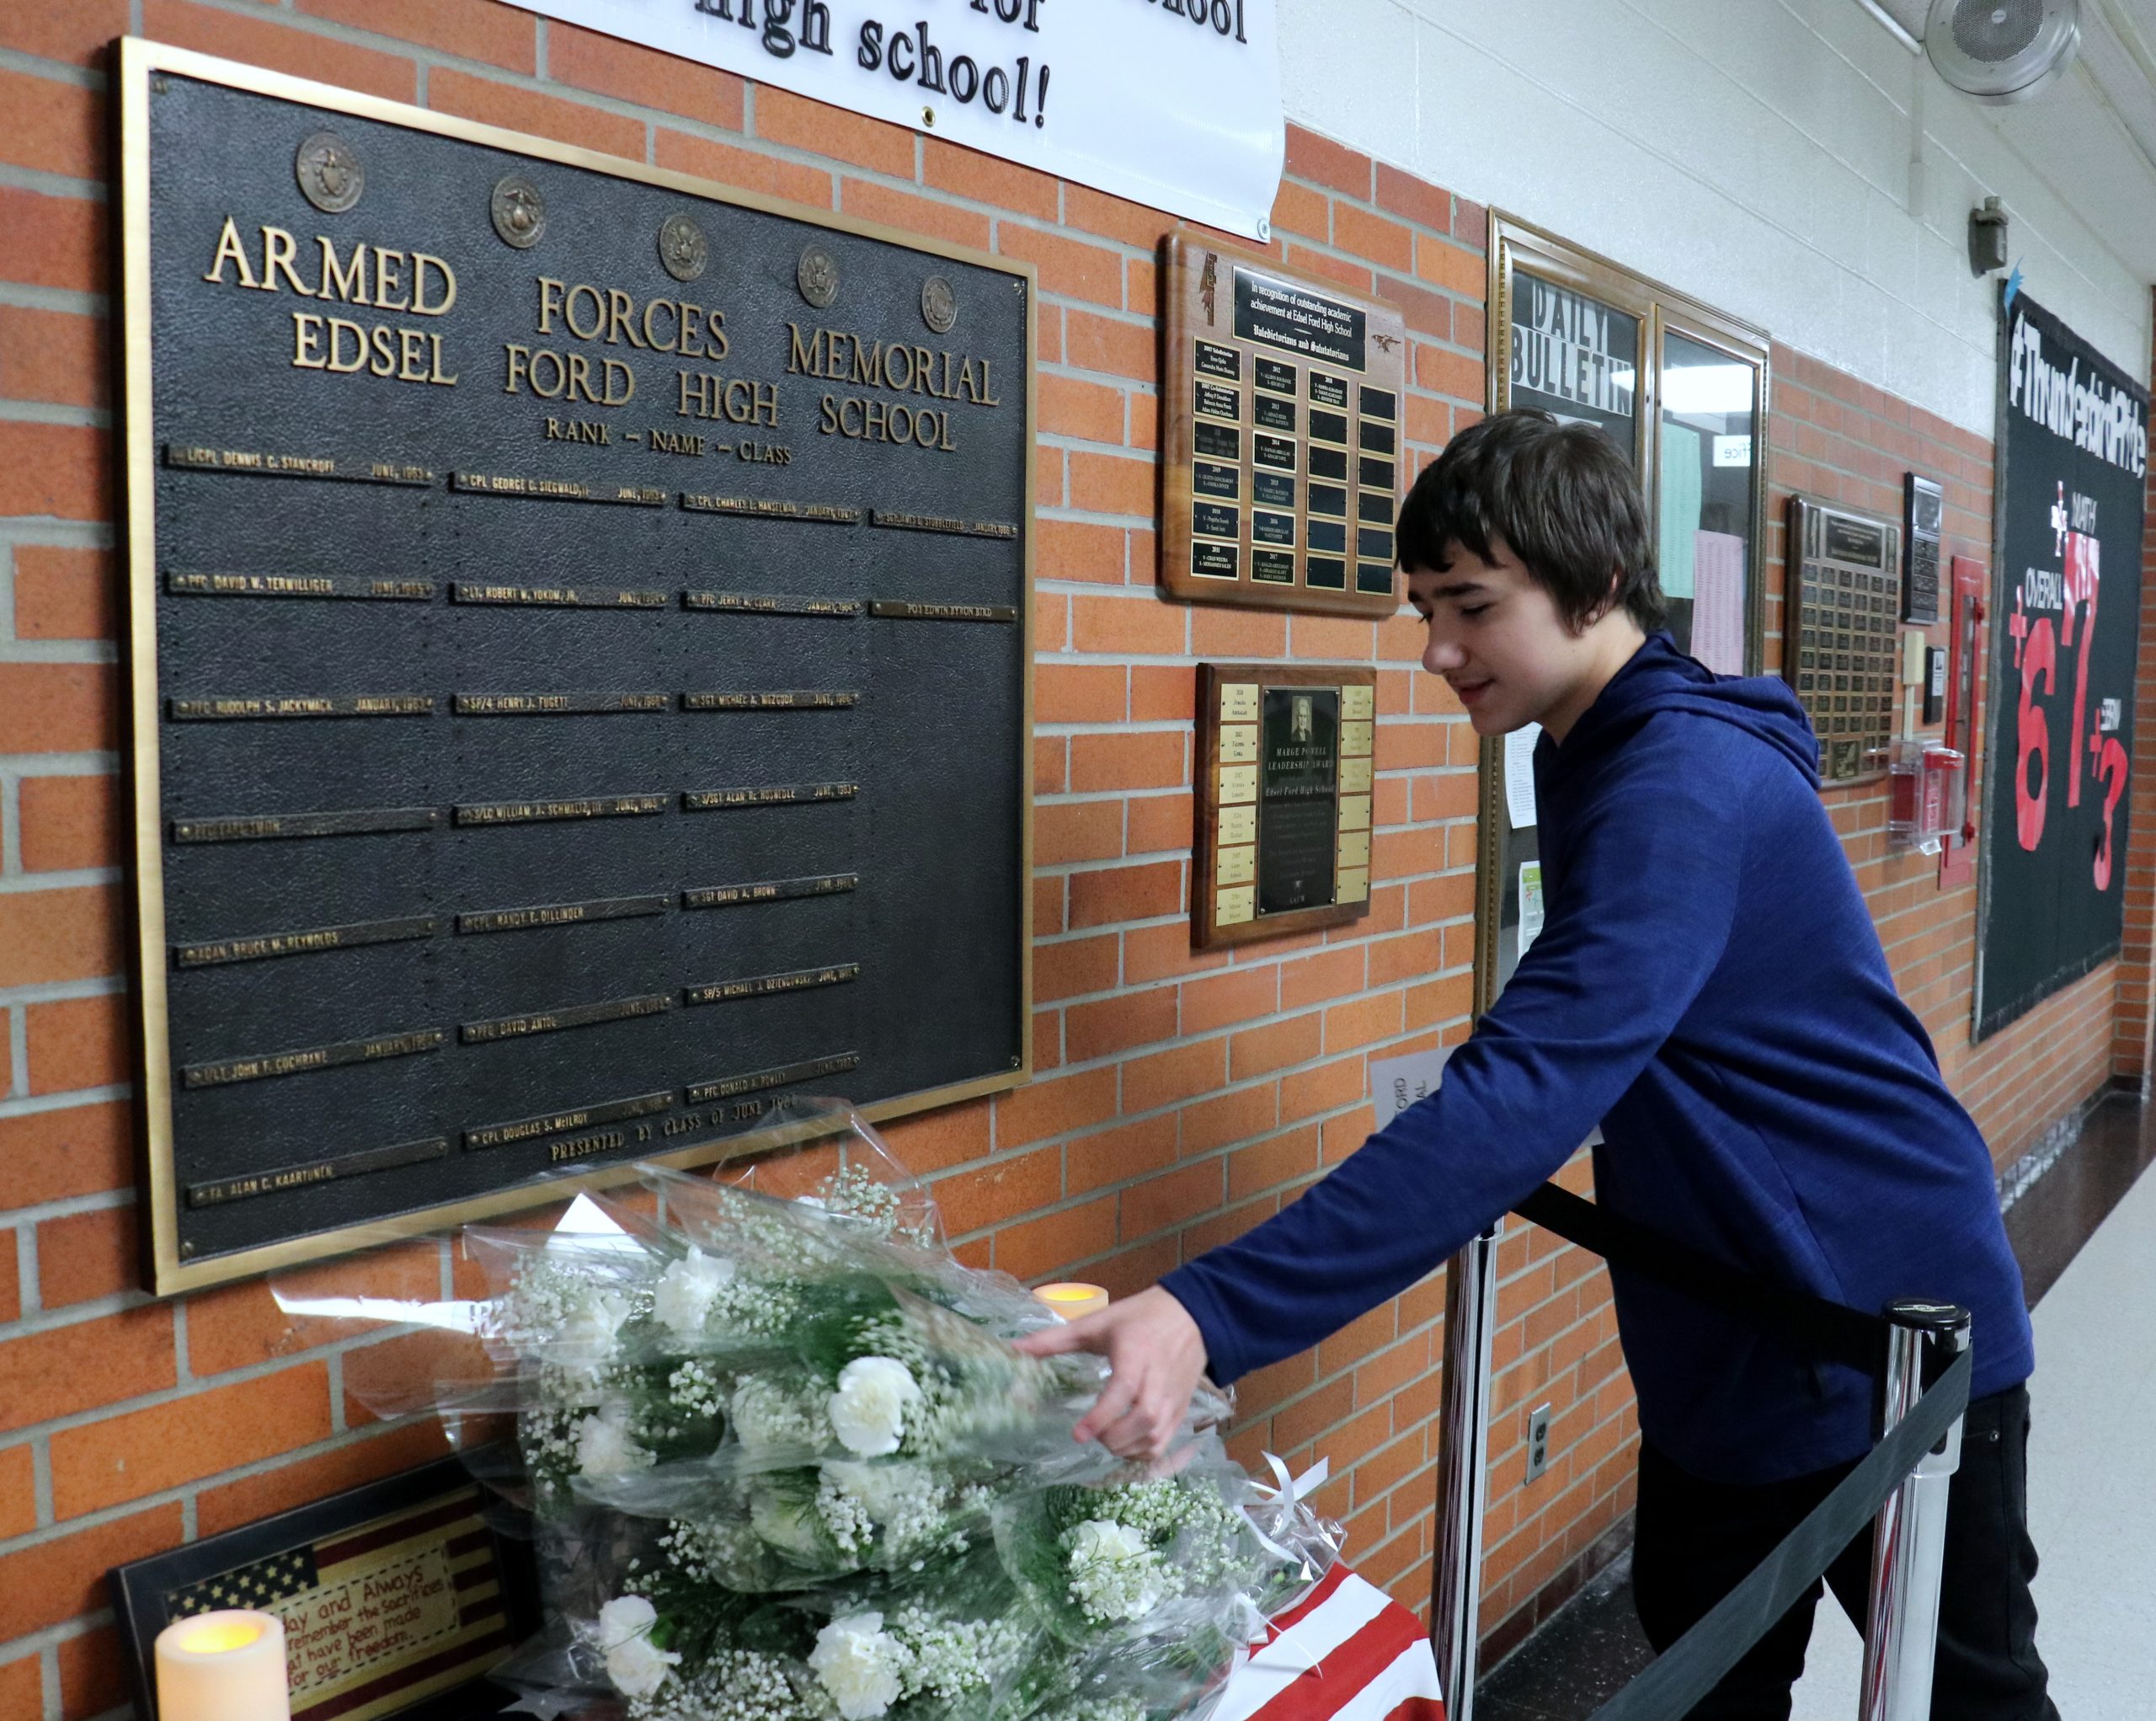 During the 2018 Memorial Day ceremony at Edsel Ford High School, a student lays flowers before a plaque remembering former students who died in service.